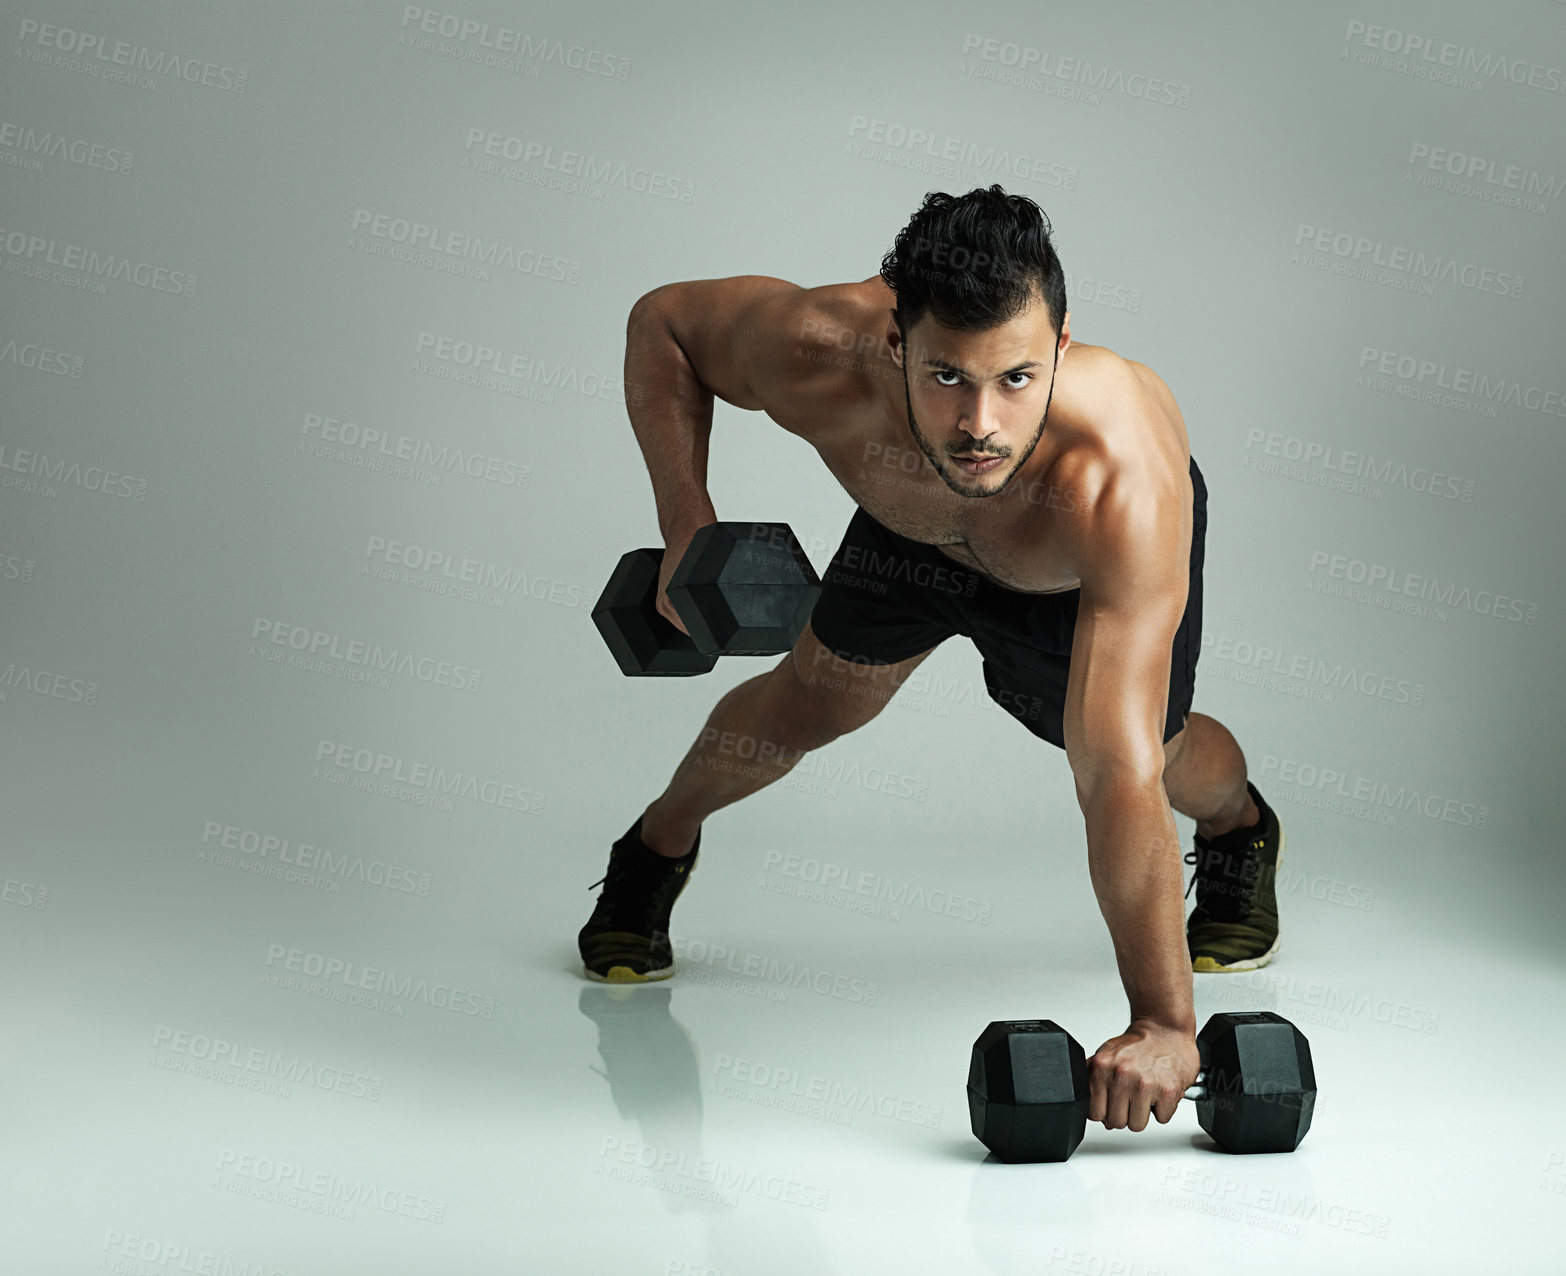 Buy stock photo Studio shot of a young man working out with dumbbells against a gray background